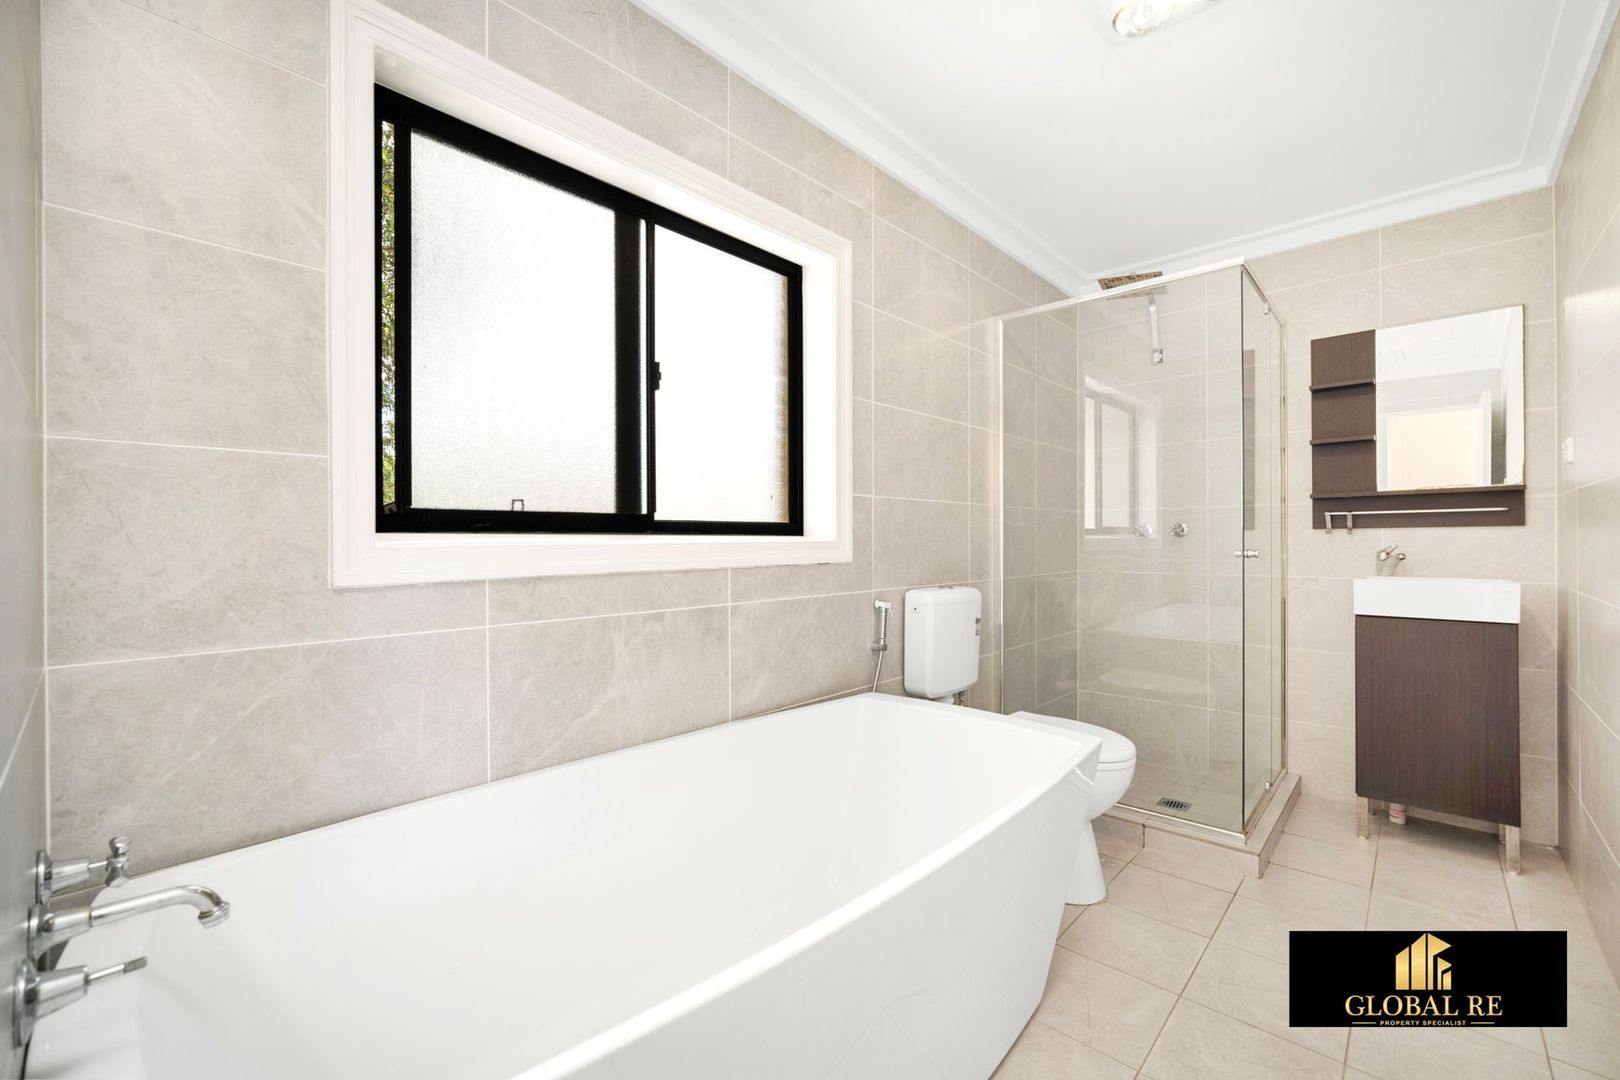 3/15 Hishion Place, Georges Hall NSW 2198, Image 2